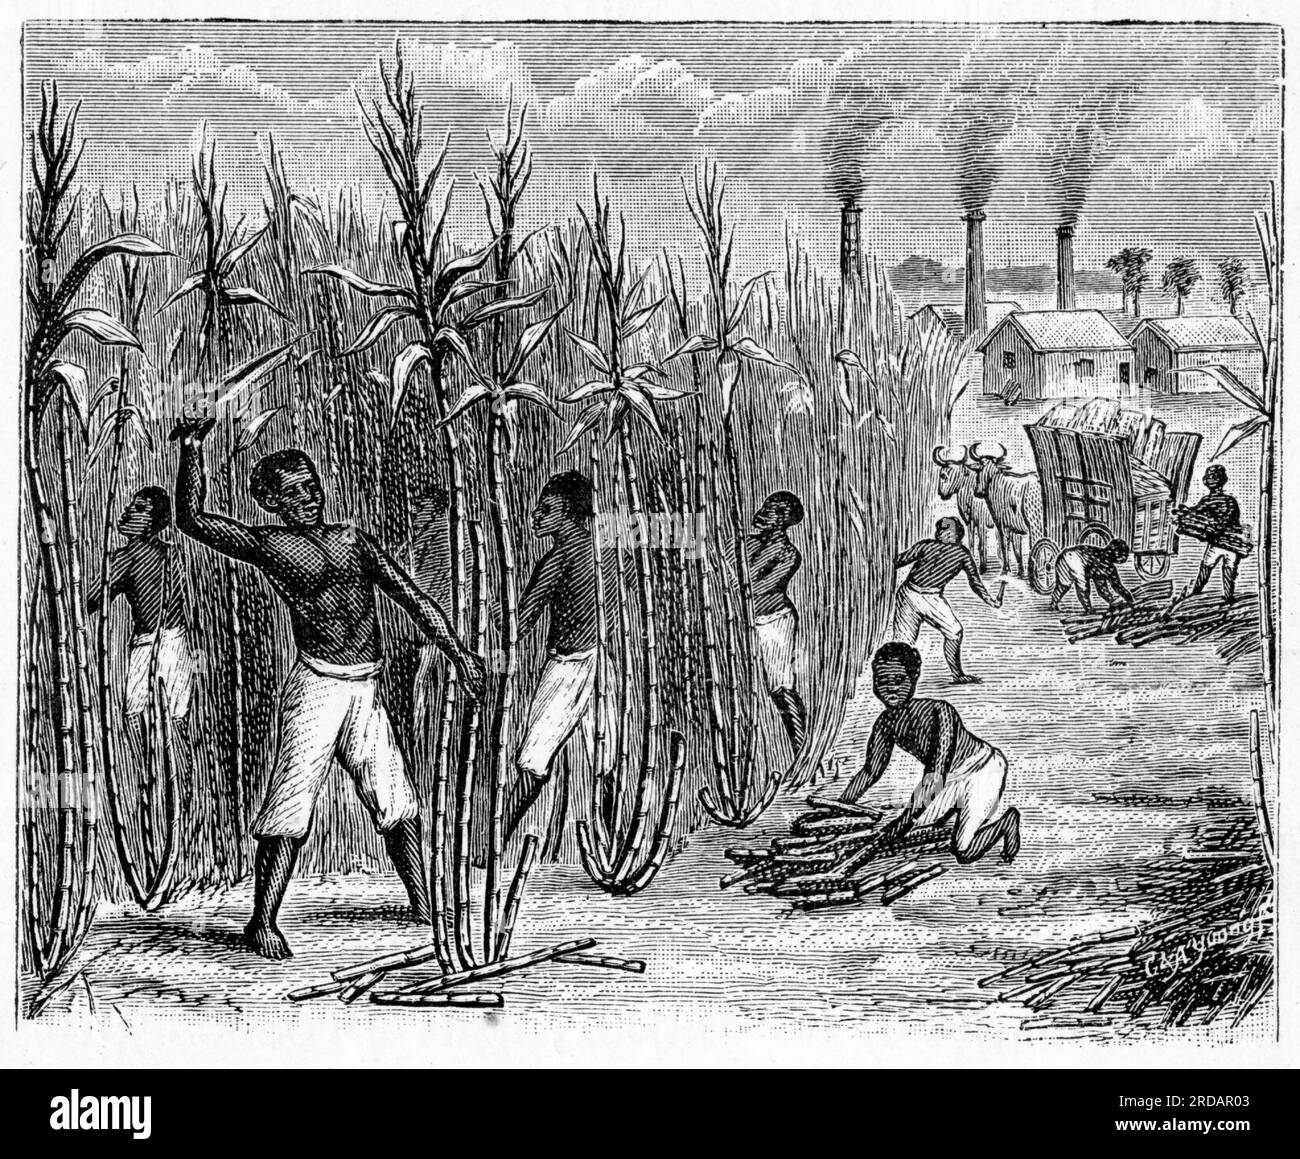 Engraving of slaves harvesting sugar cane with a refinery in the background, circa 1880 Stock Photo